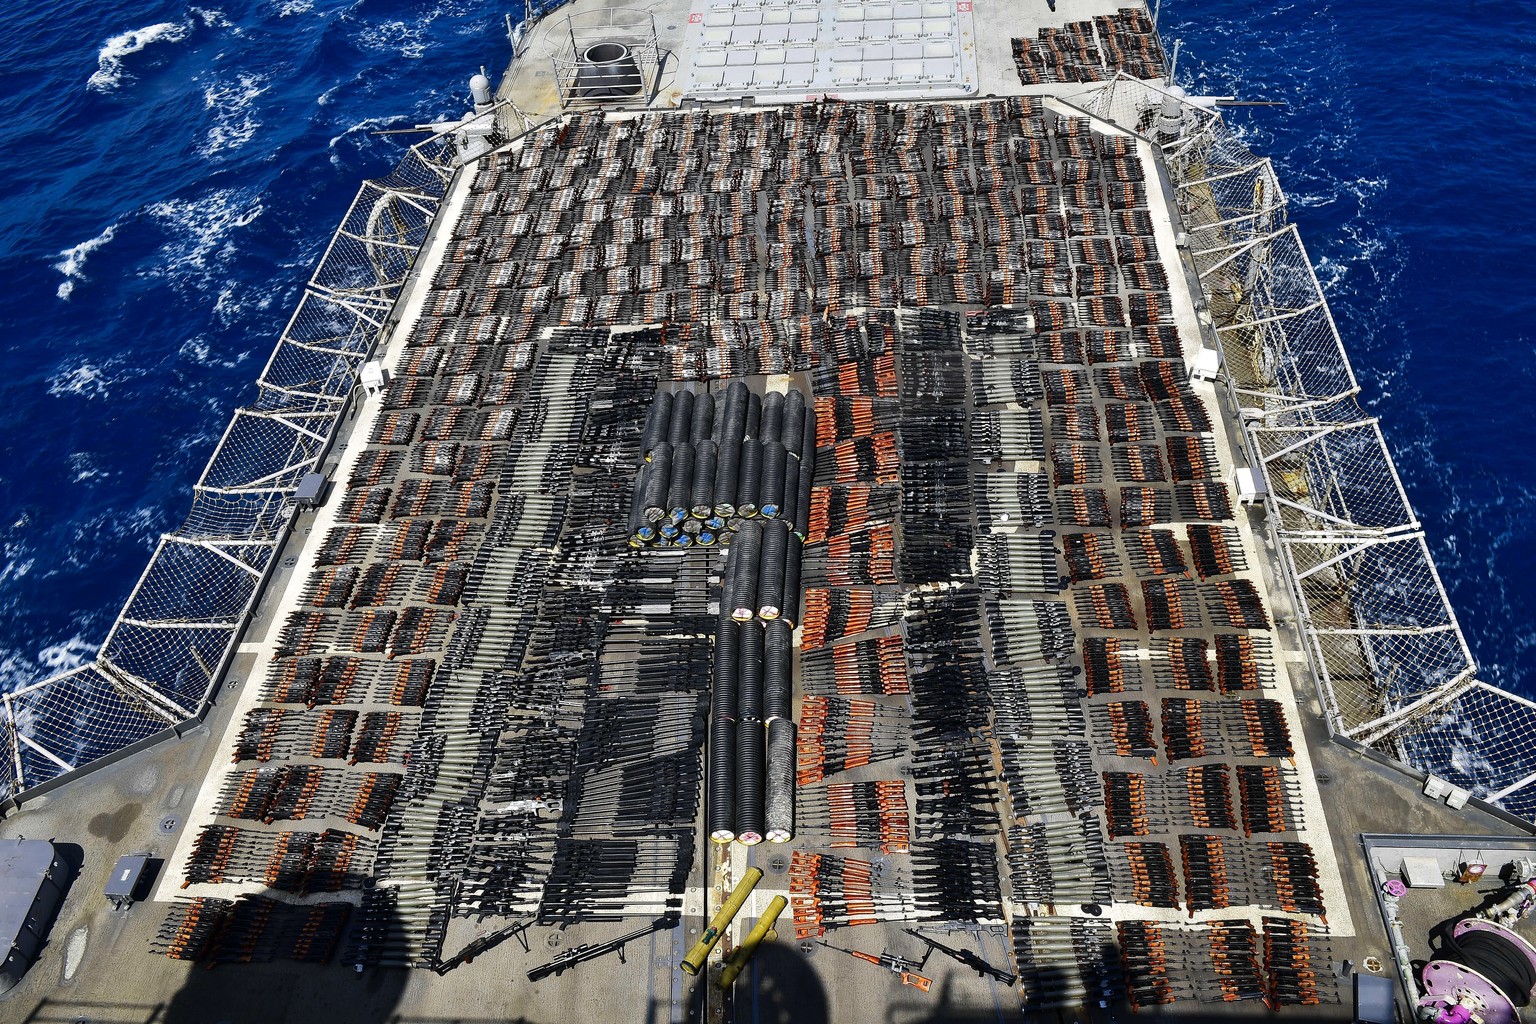 Weapons that the U.S. Navy described as coming from a hidden arms shipment aboard a stateless dhow are seen aboard the guided-missile cruiser USS Monterey on Saturday, May 8, 2021. The U.S. Navy annou ...